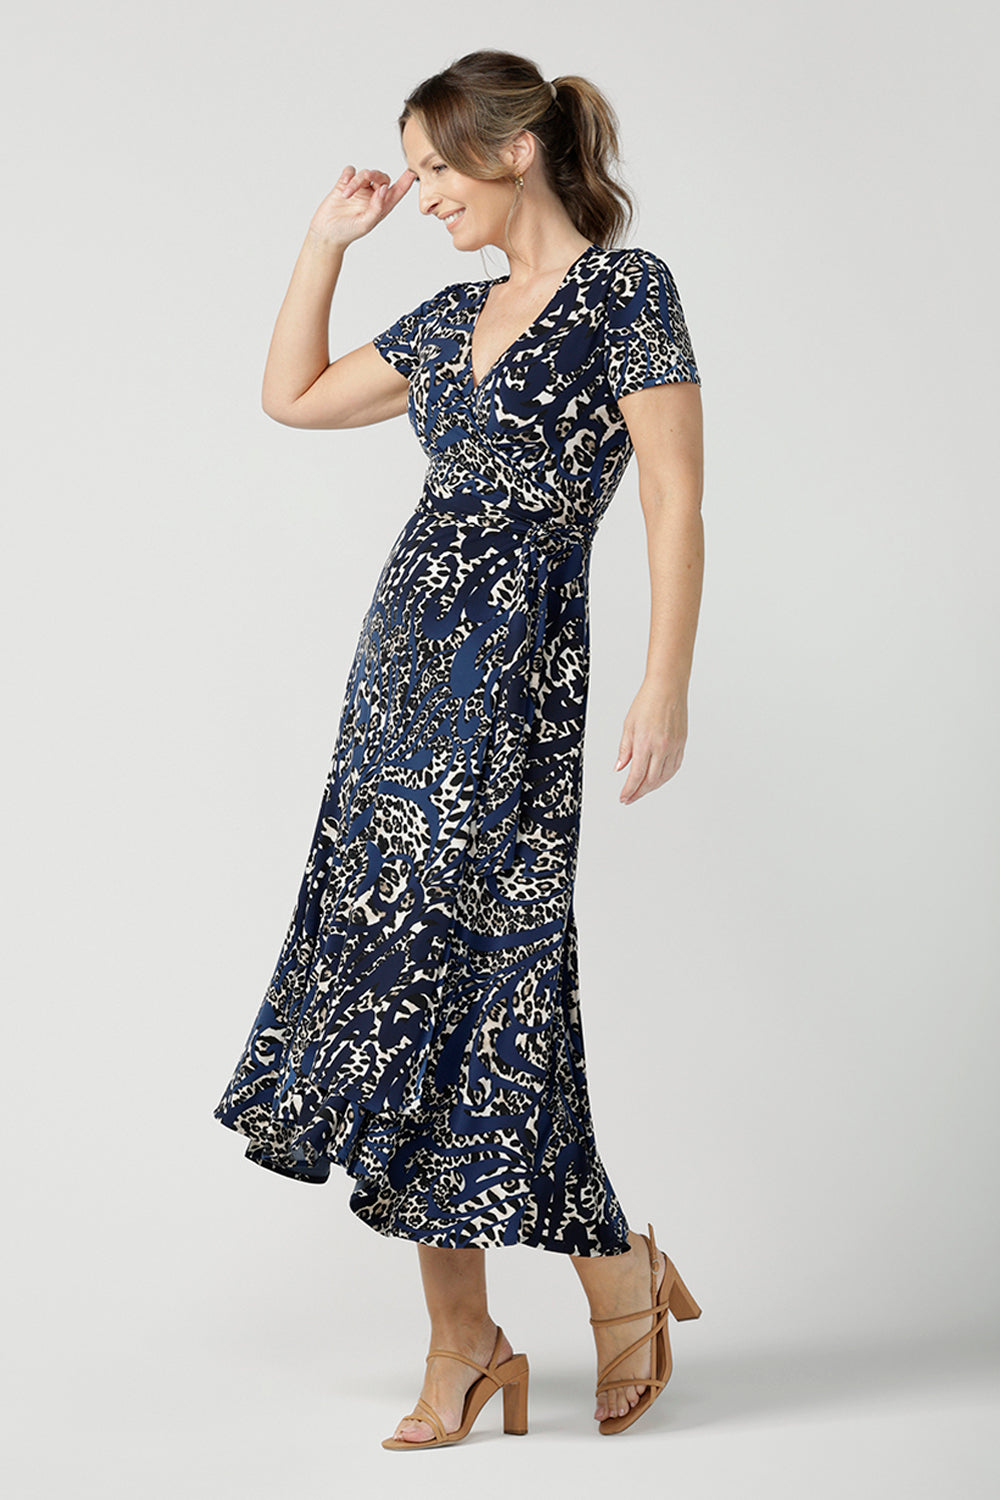 A size 10 over 40 year old woman wears a animal print jersey wrap dress with tailored godets in the skirt. A good wrap dress for summer, shop Australian-made plus size wrap dresses online at Australian fashion brand Leina & Fleur.